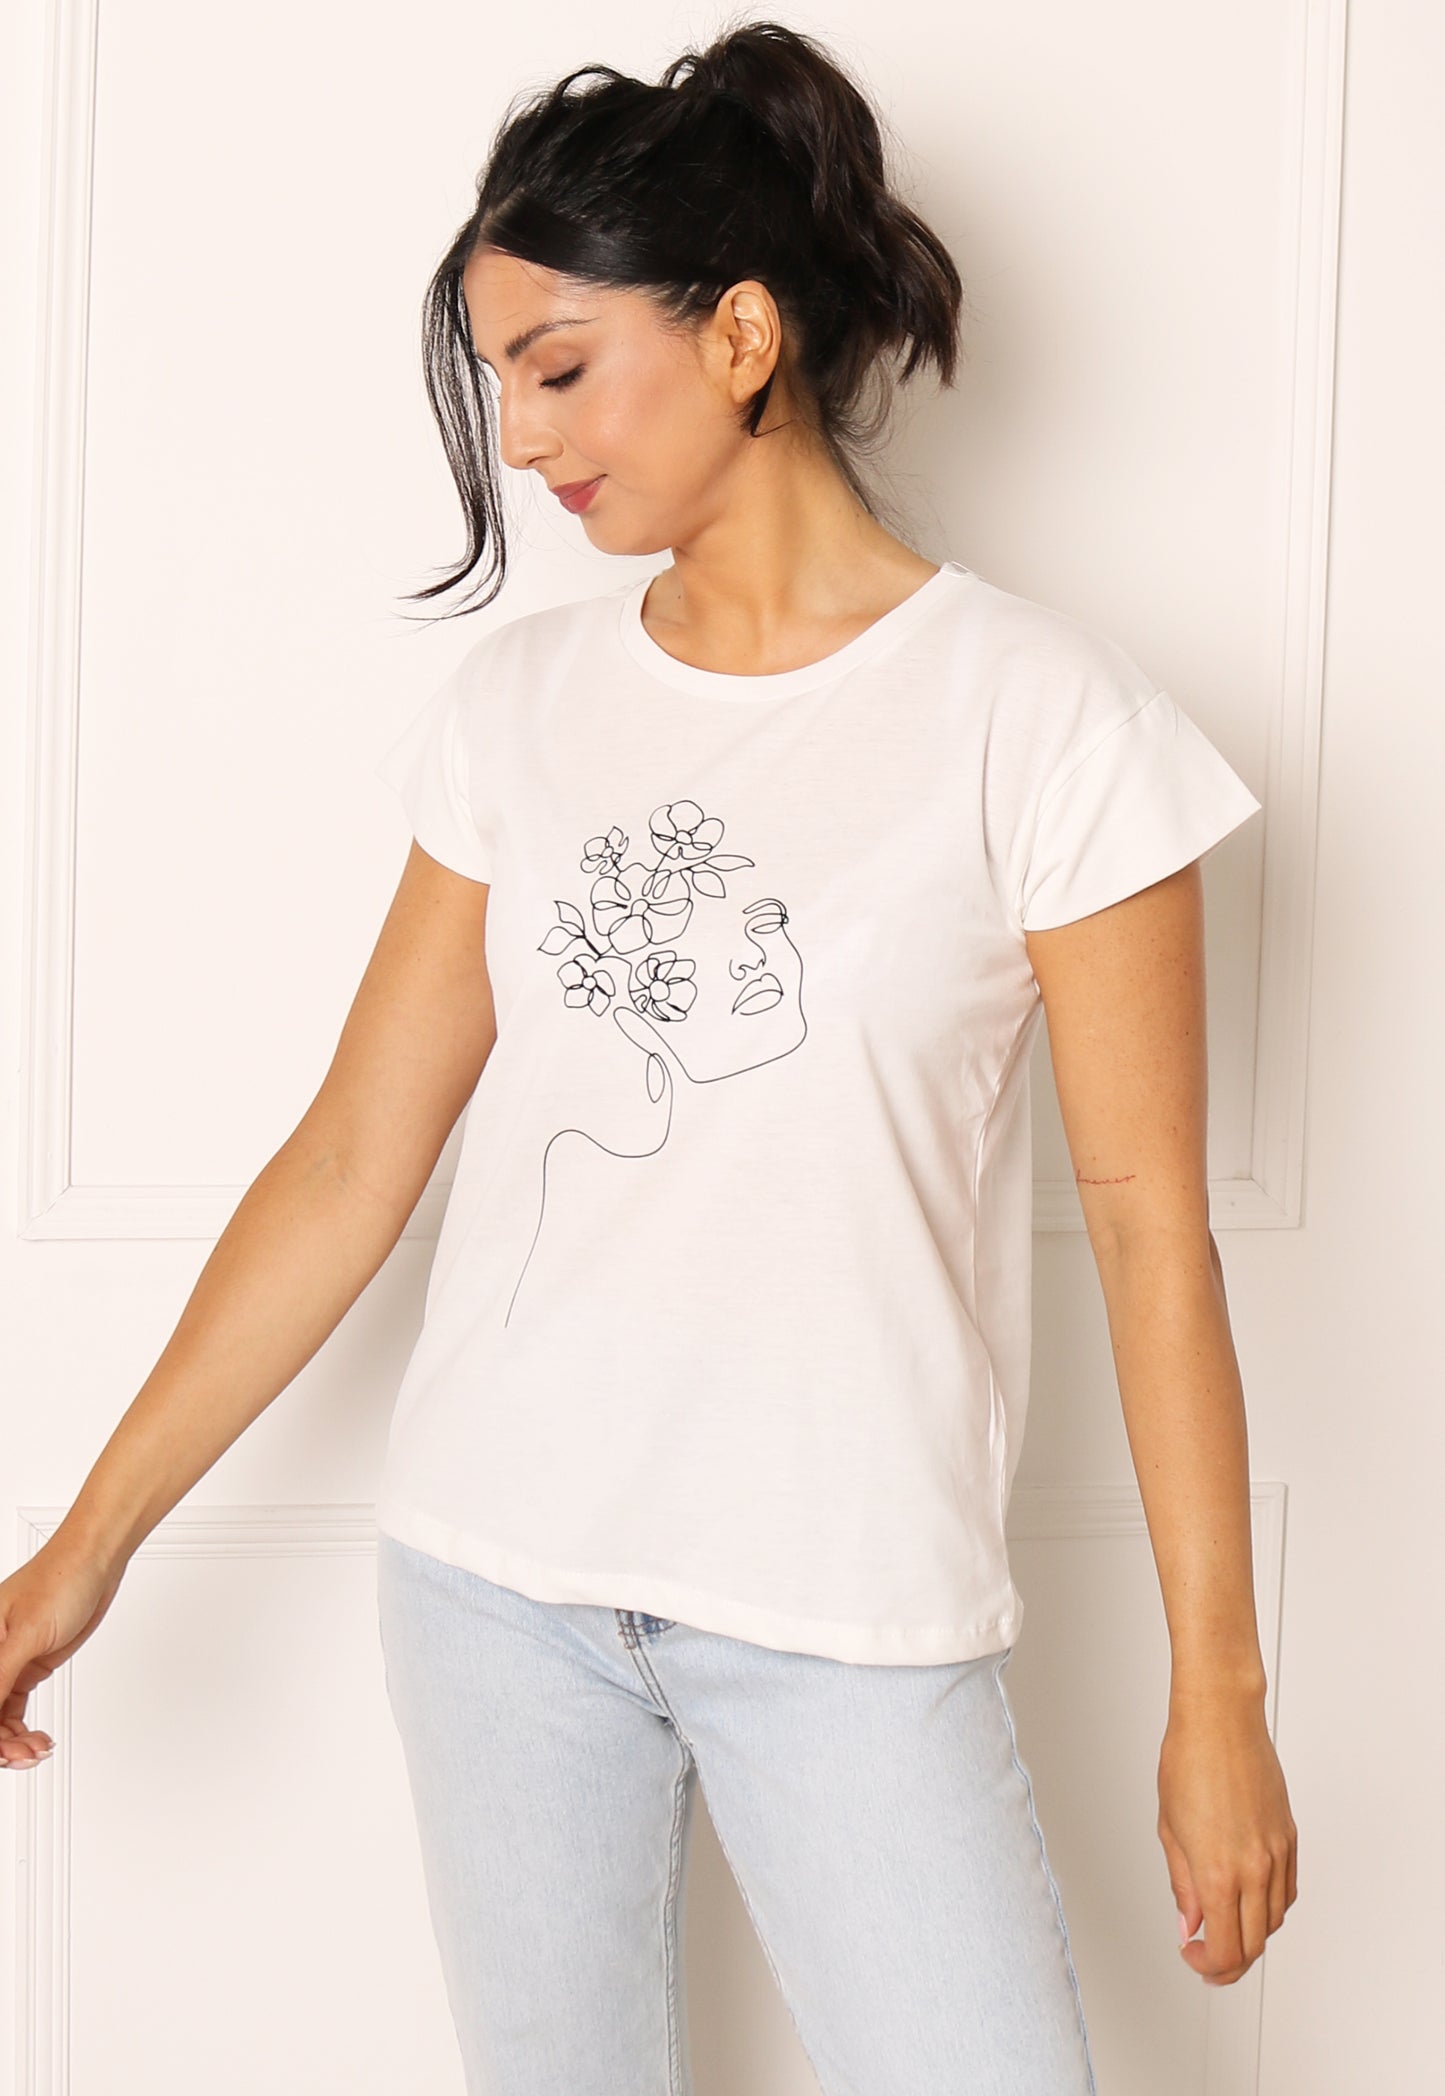 VILA Abstract One Line Woman's Face Drawing T-shirt in White - concretebartops